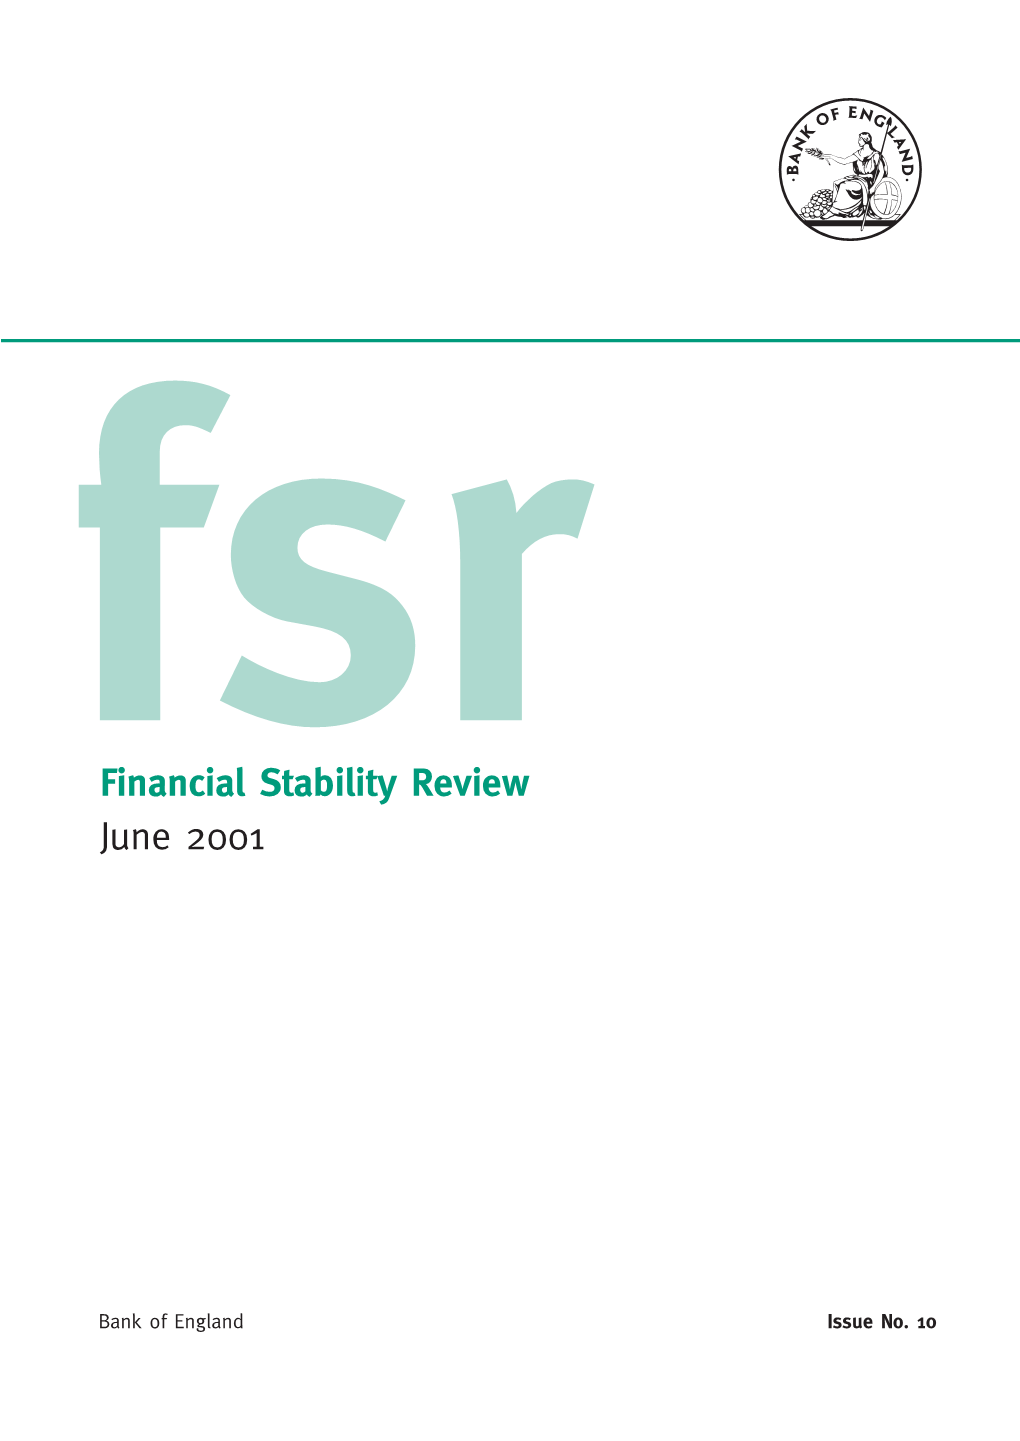 Financial Stability Review June 2001